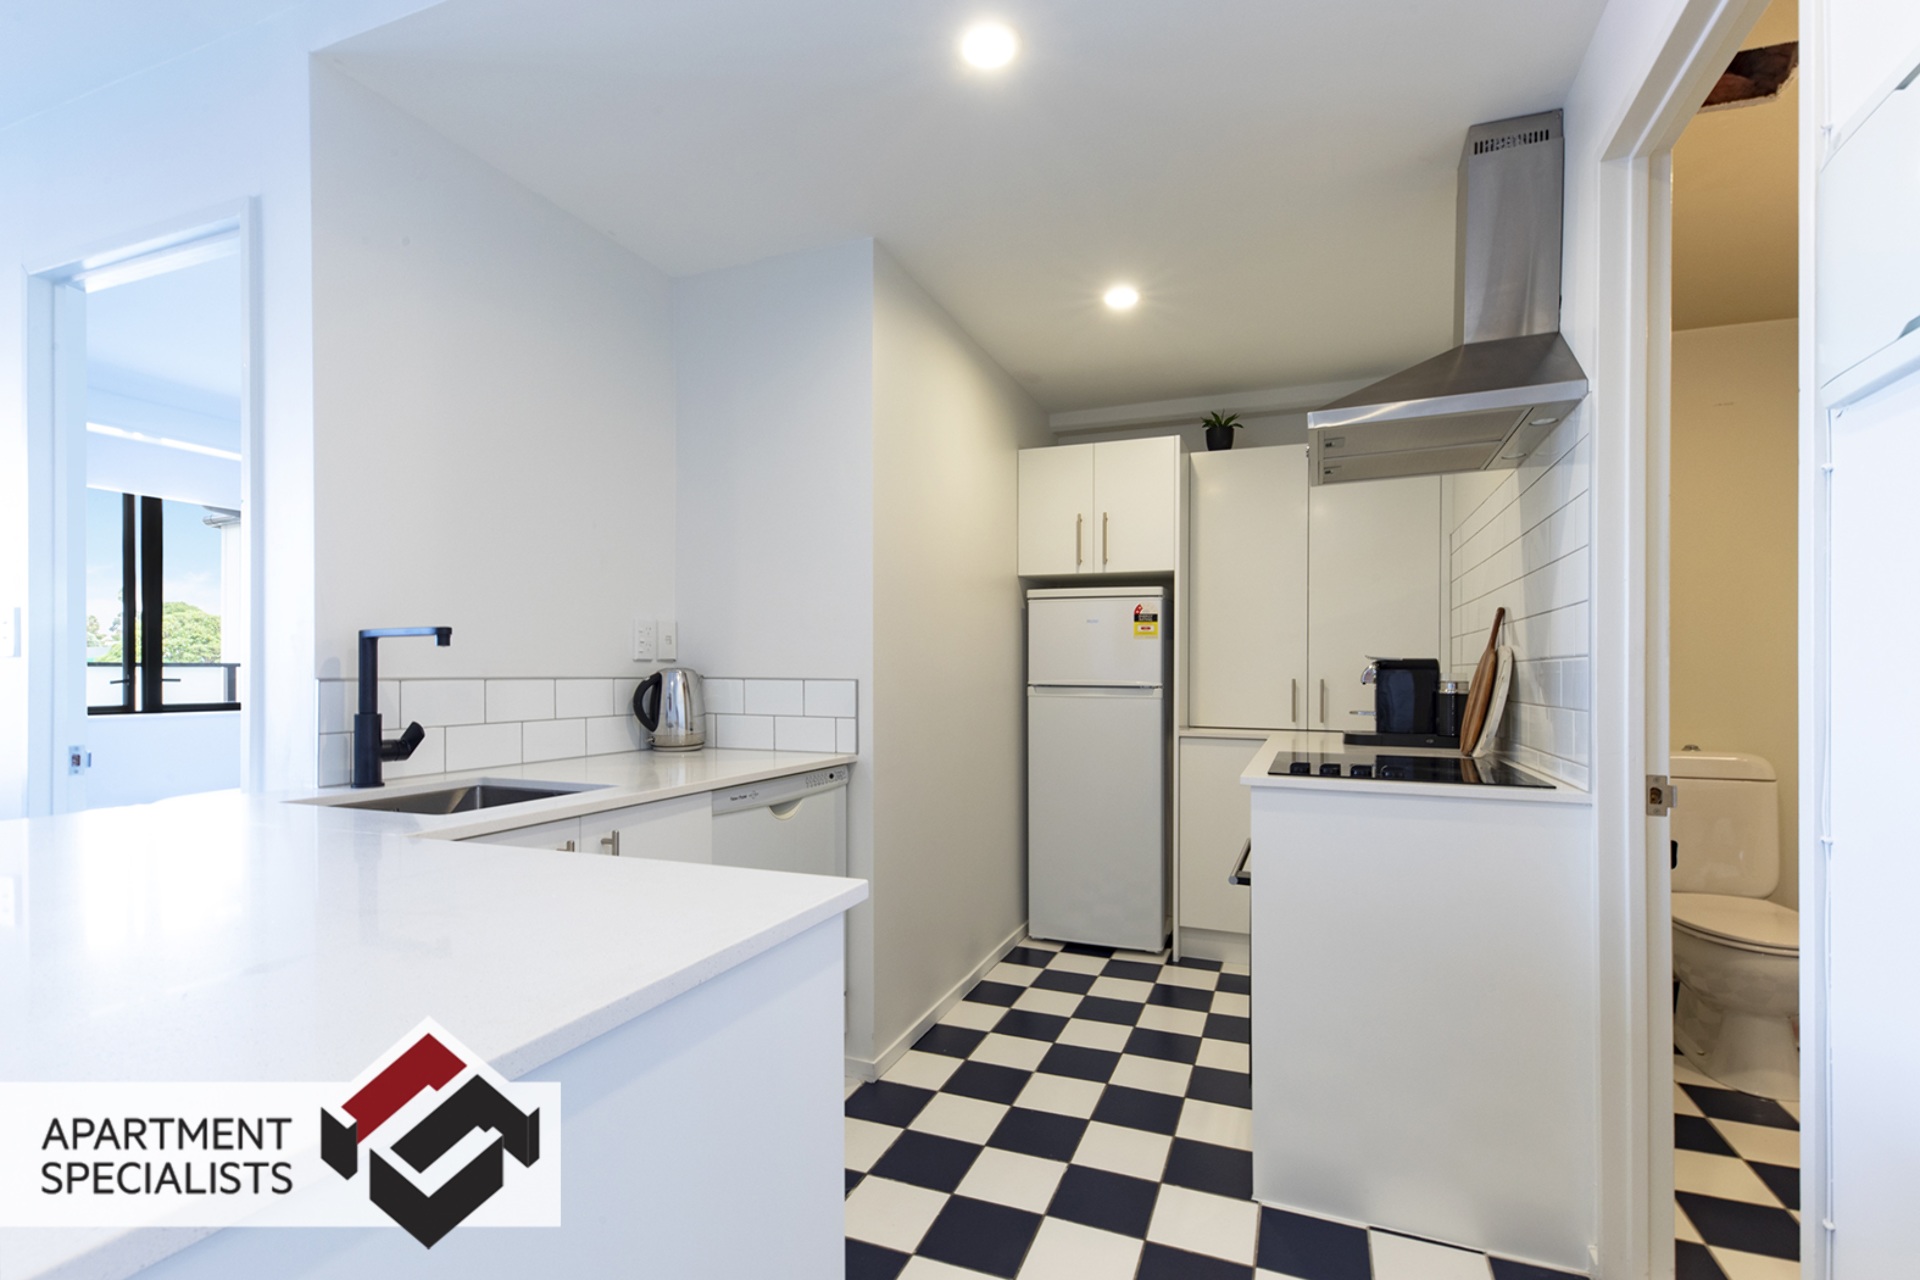 7 | 250 Richmond Road, Ponsonby | Apartment Specialists